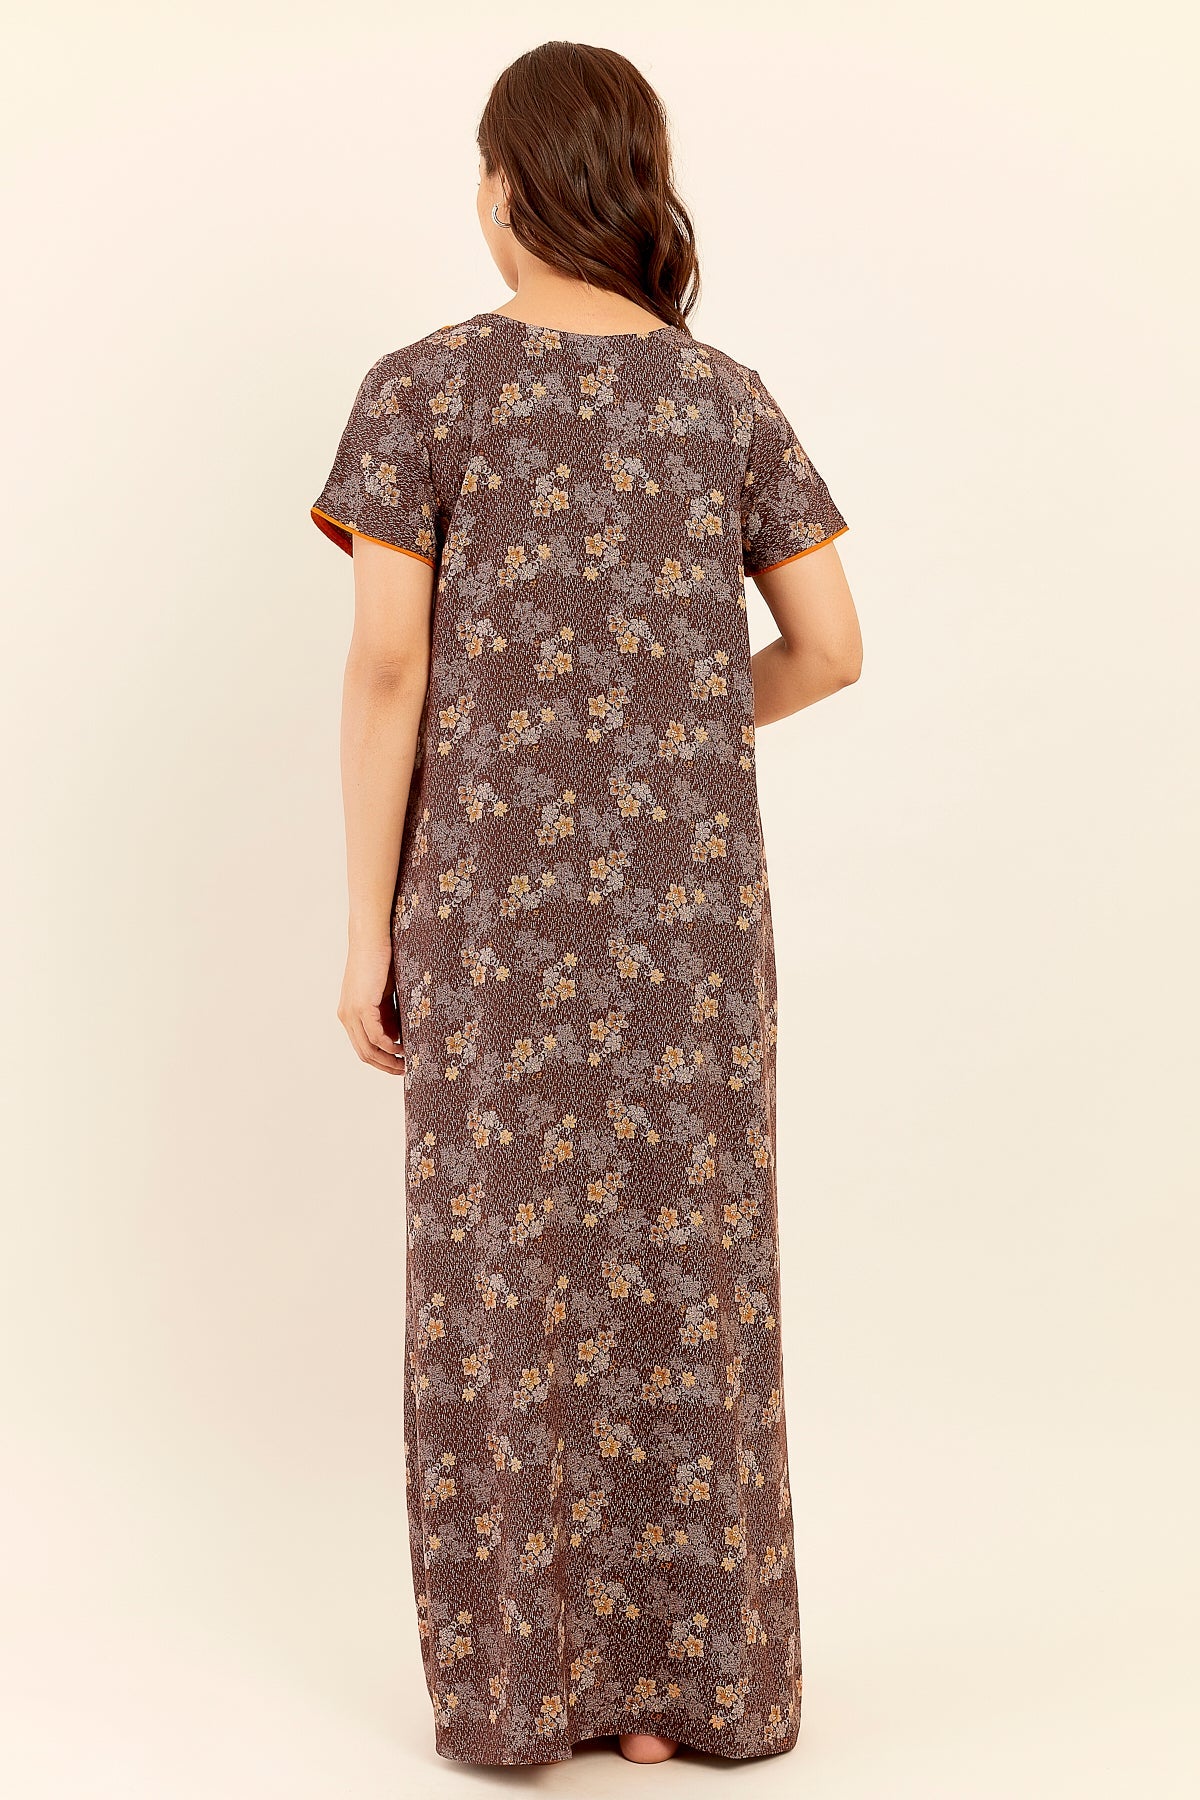 Floral Digital Printed With Embroidered Nighty - Brown